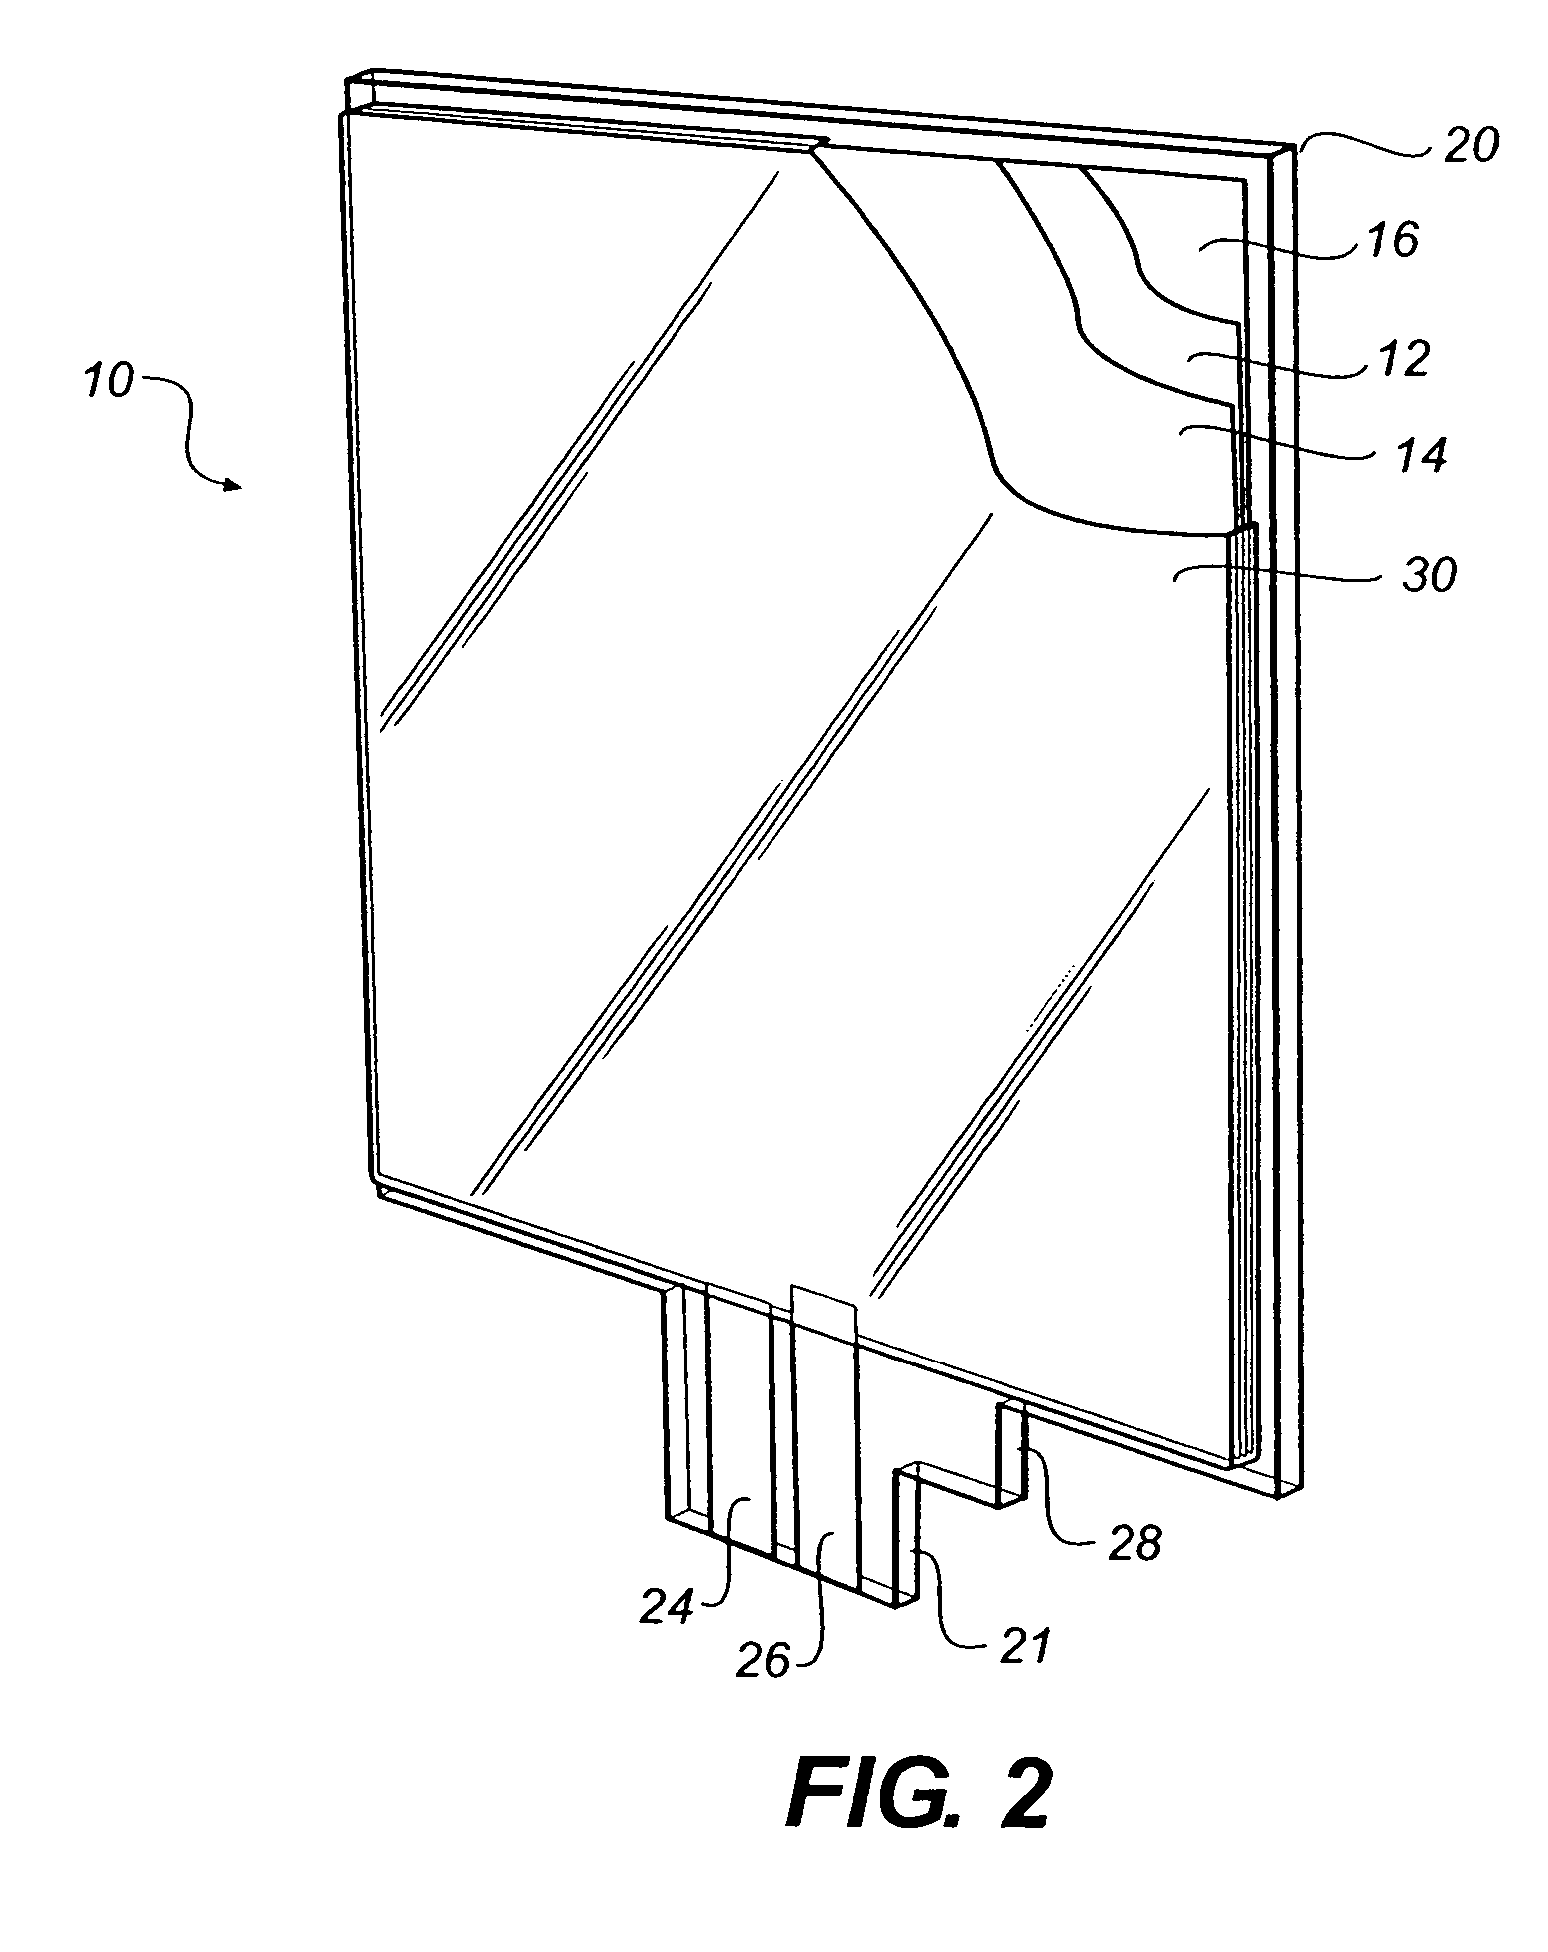 Lighting apparatus with flexible OLED area illumination light source and fixture